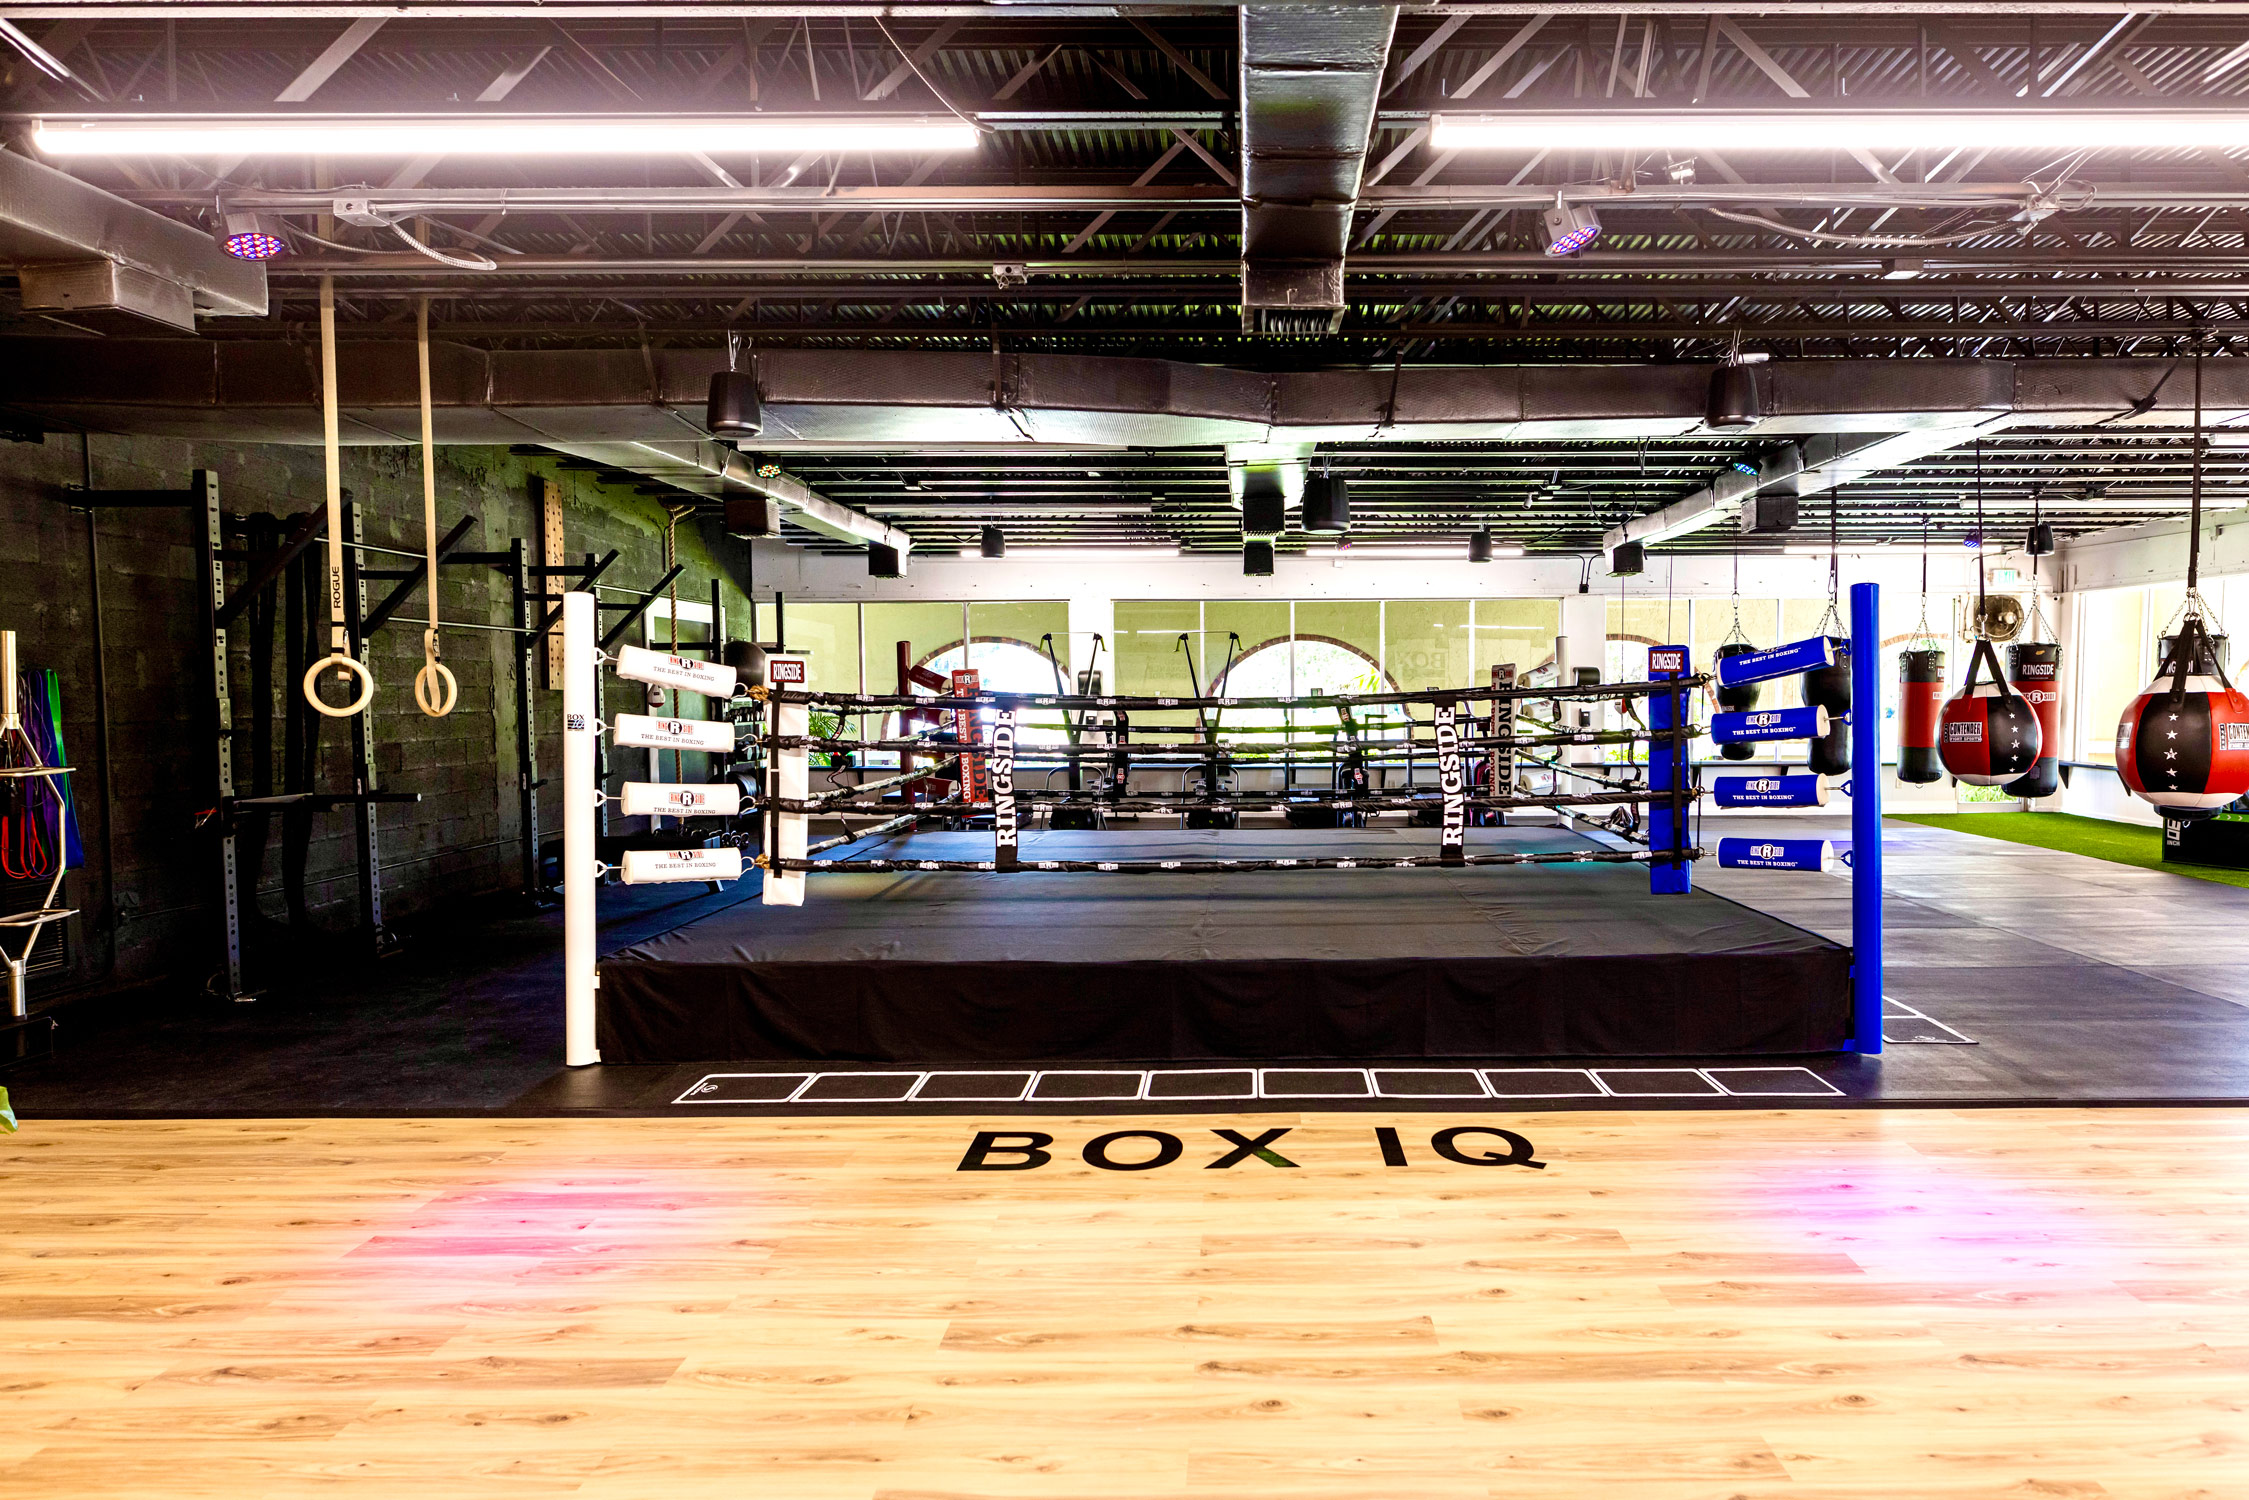 Boxing ring in a gym with gymnastics rings and punching bags in view